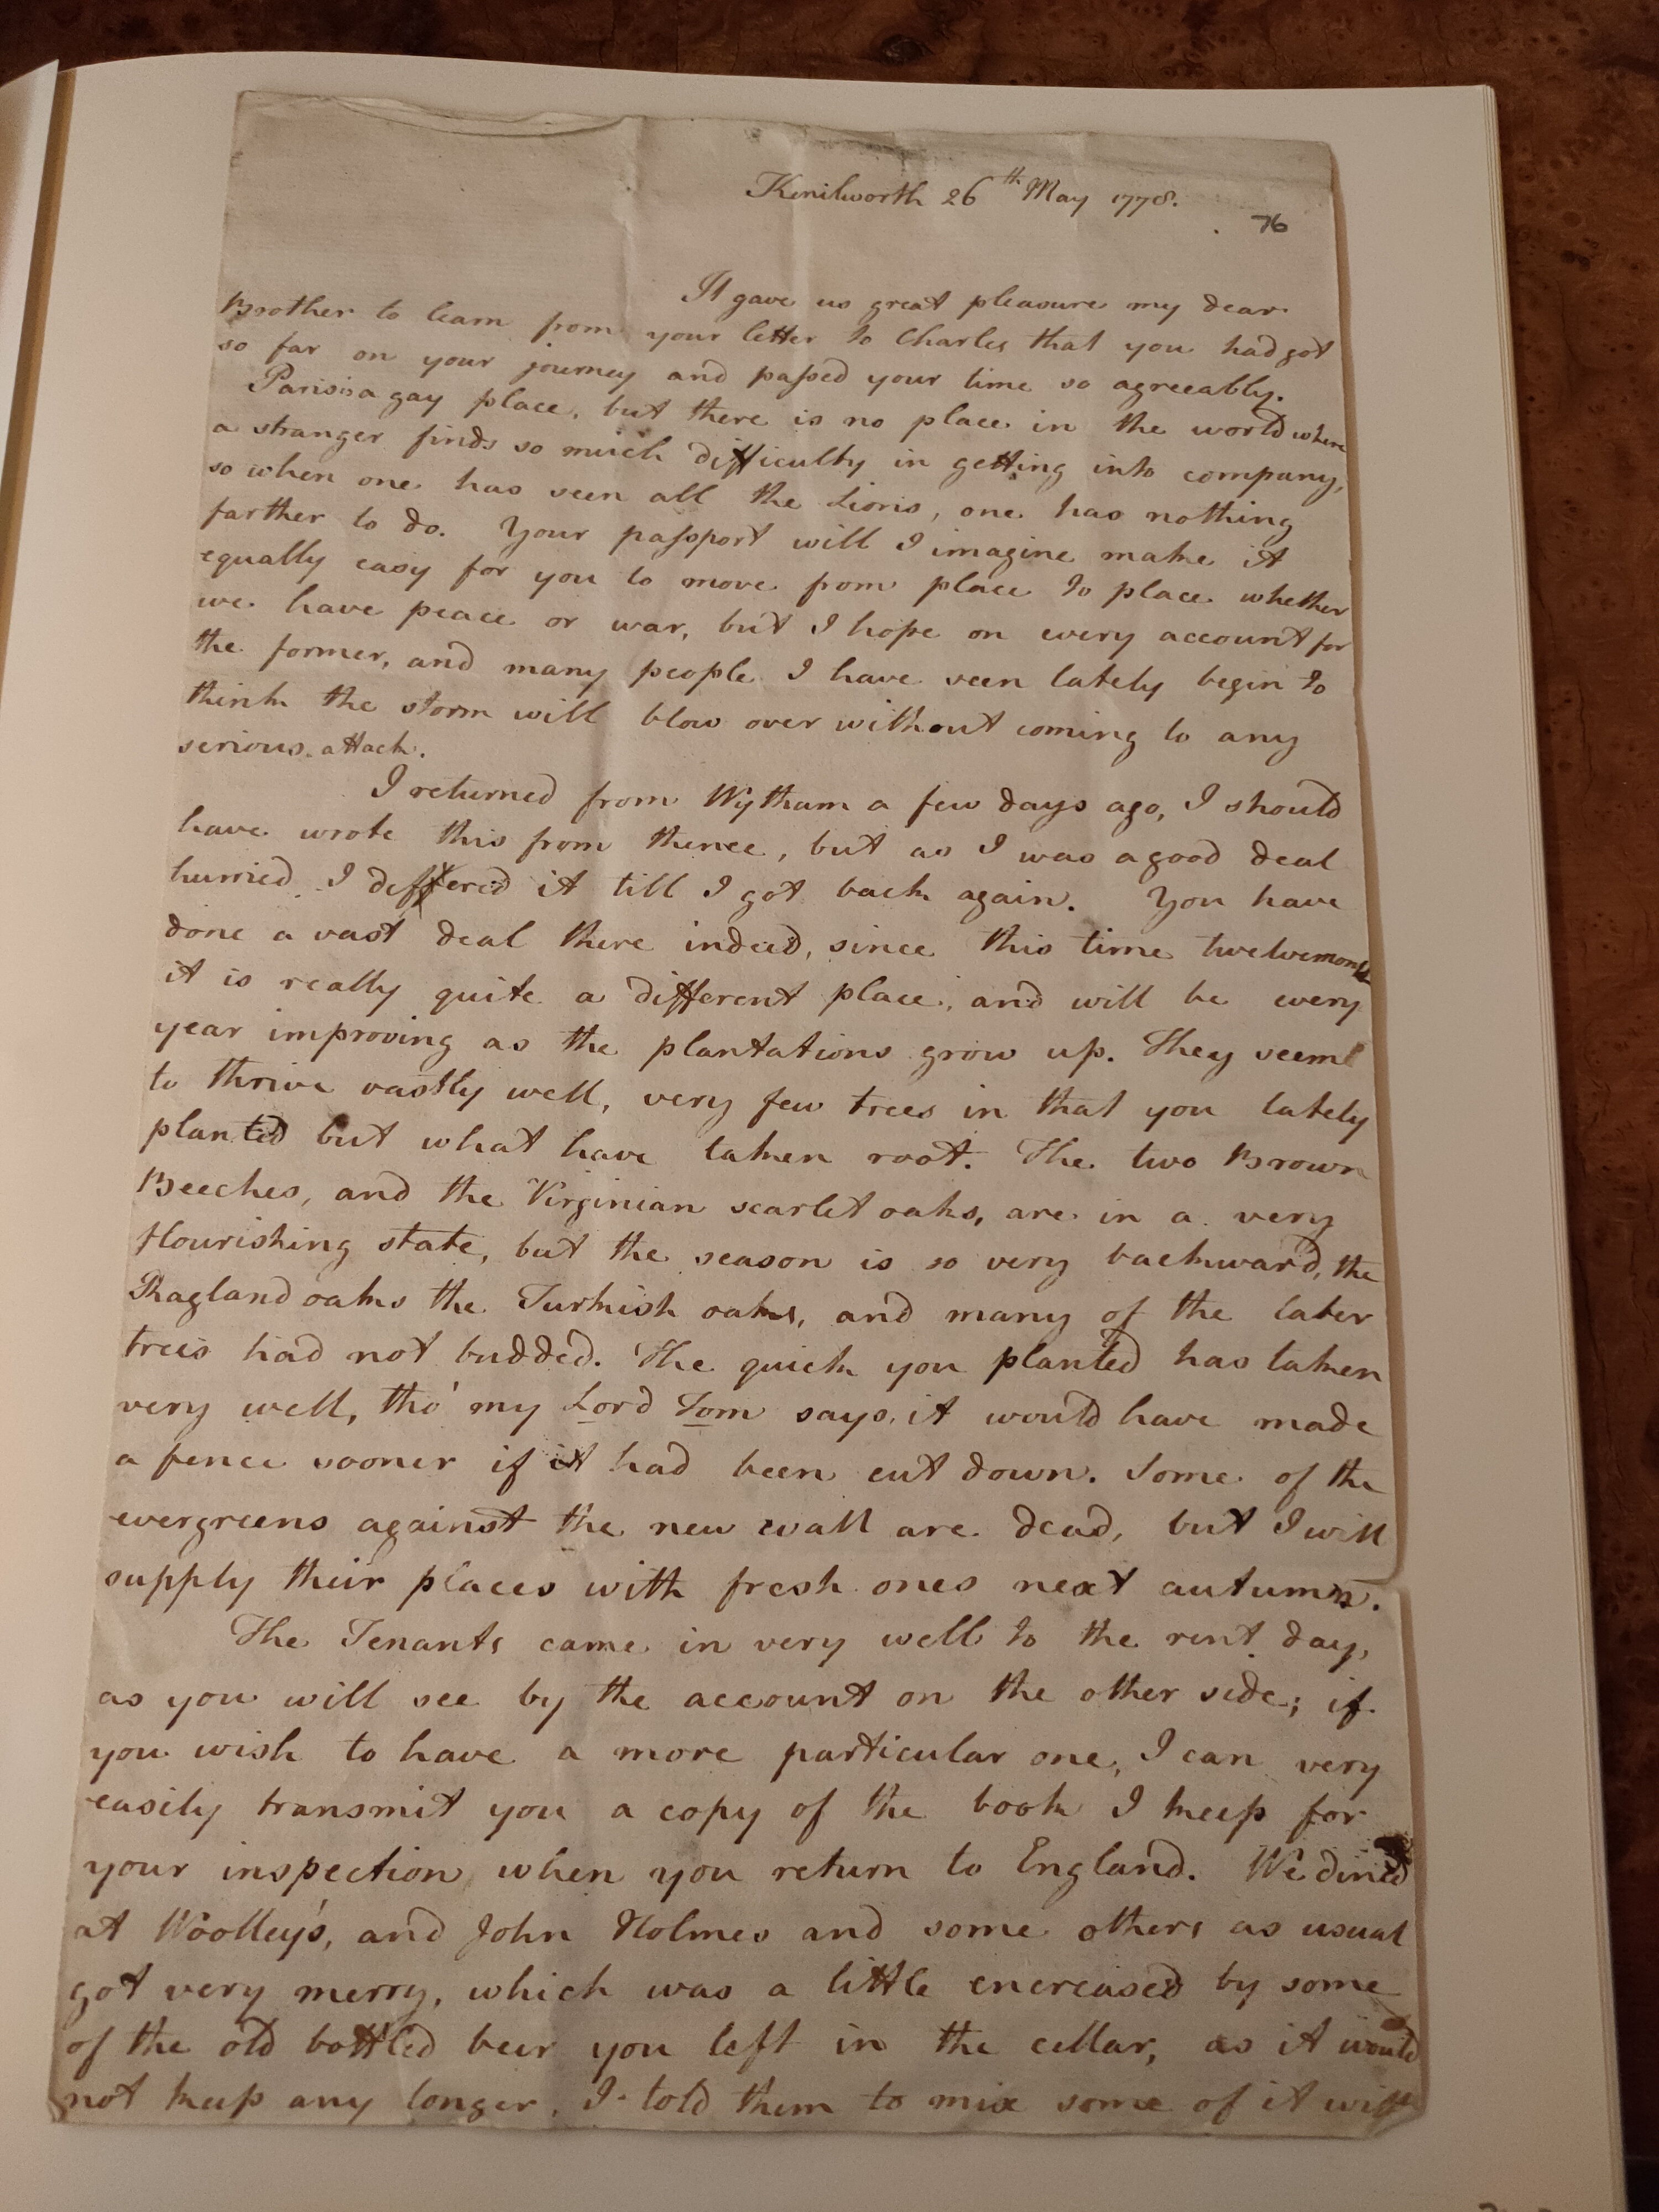 Image #1 of letter: Robert Augustus Johnson to George William Johnson, 26 May 1778